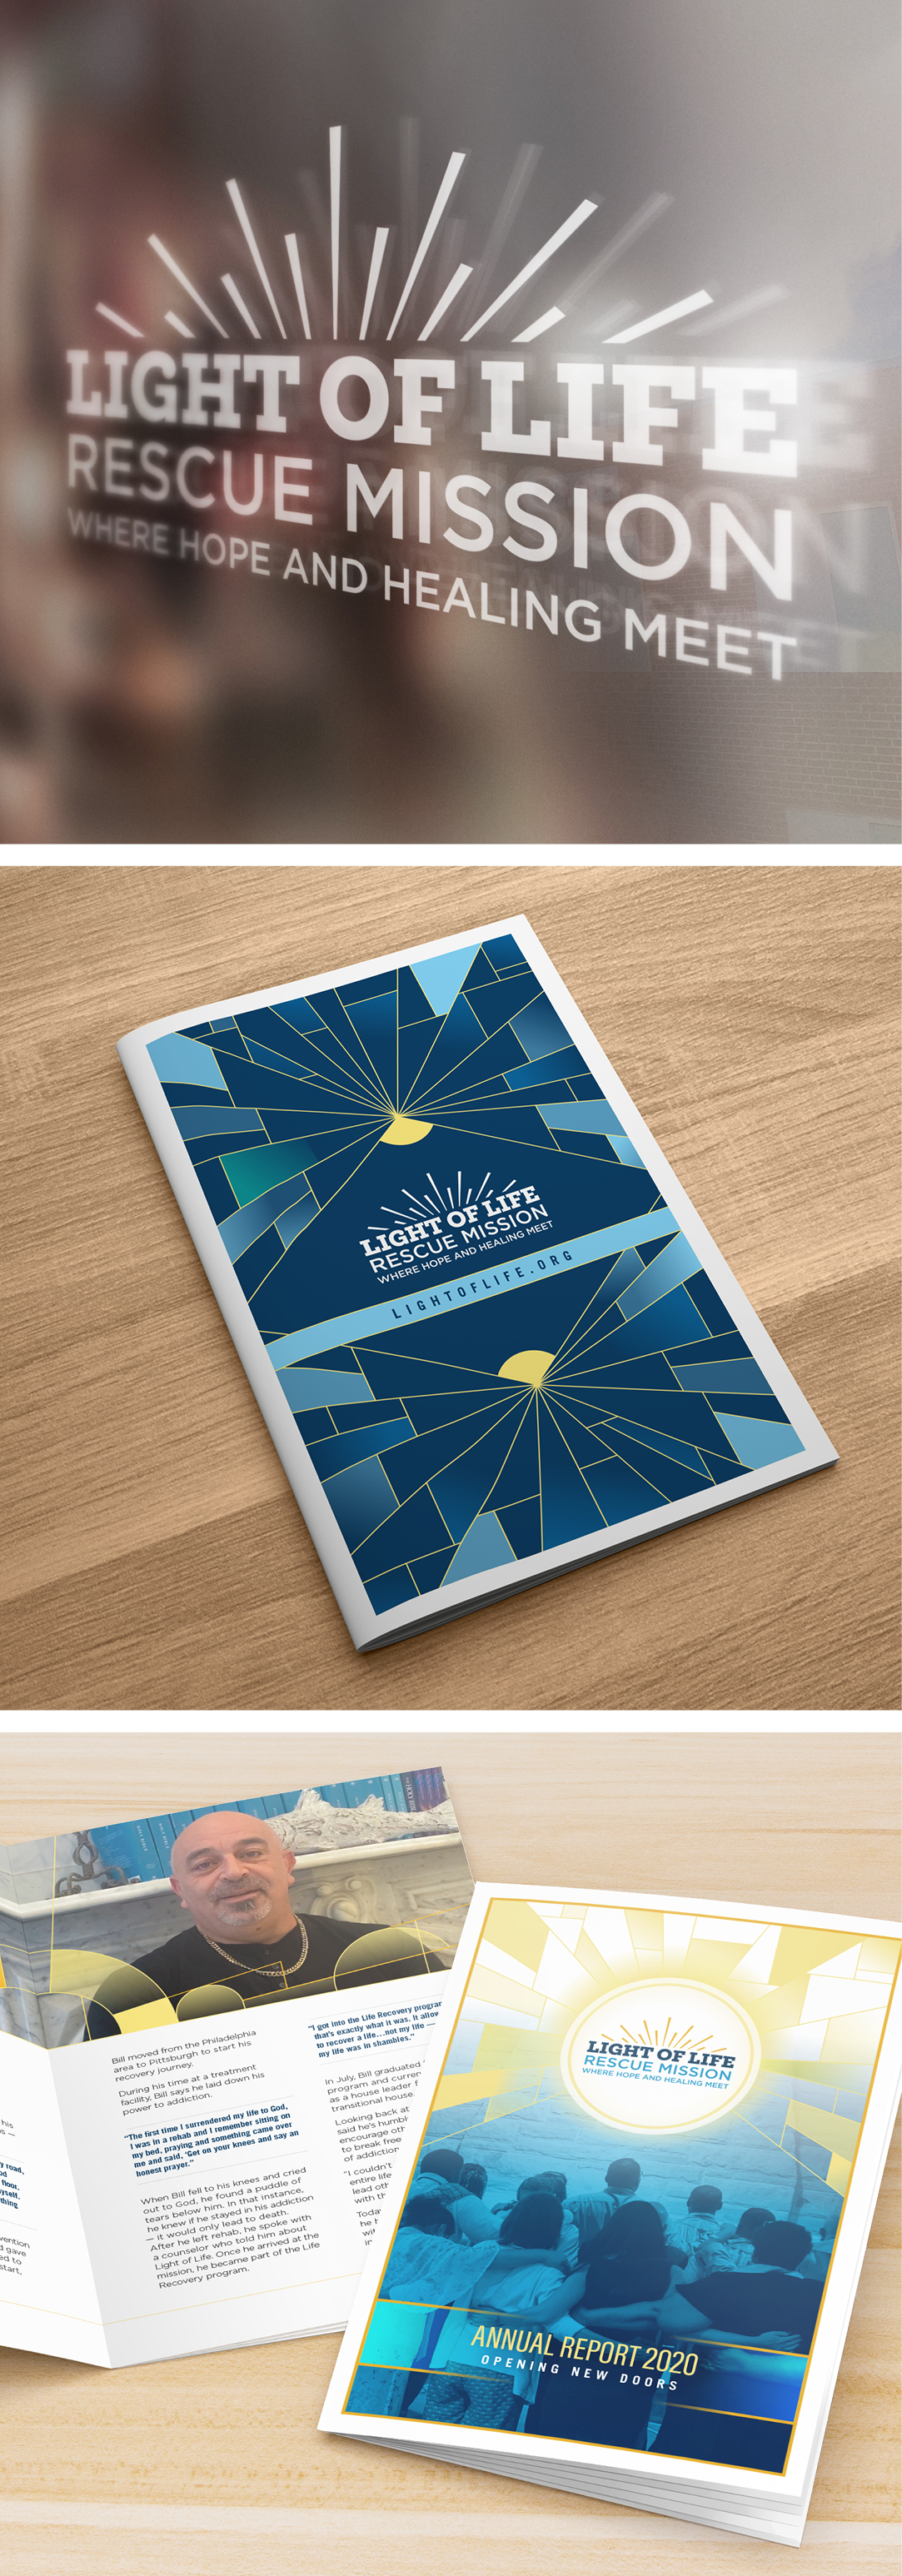 Annual report cover design and signage